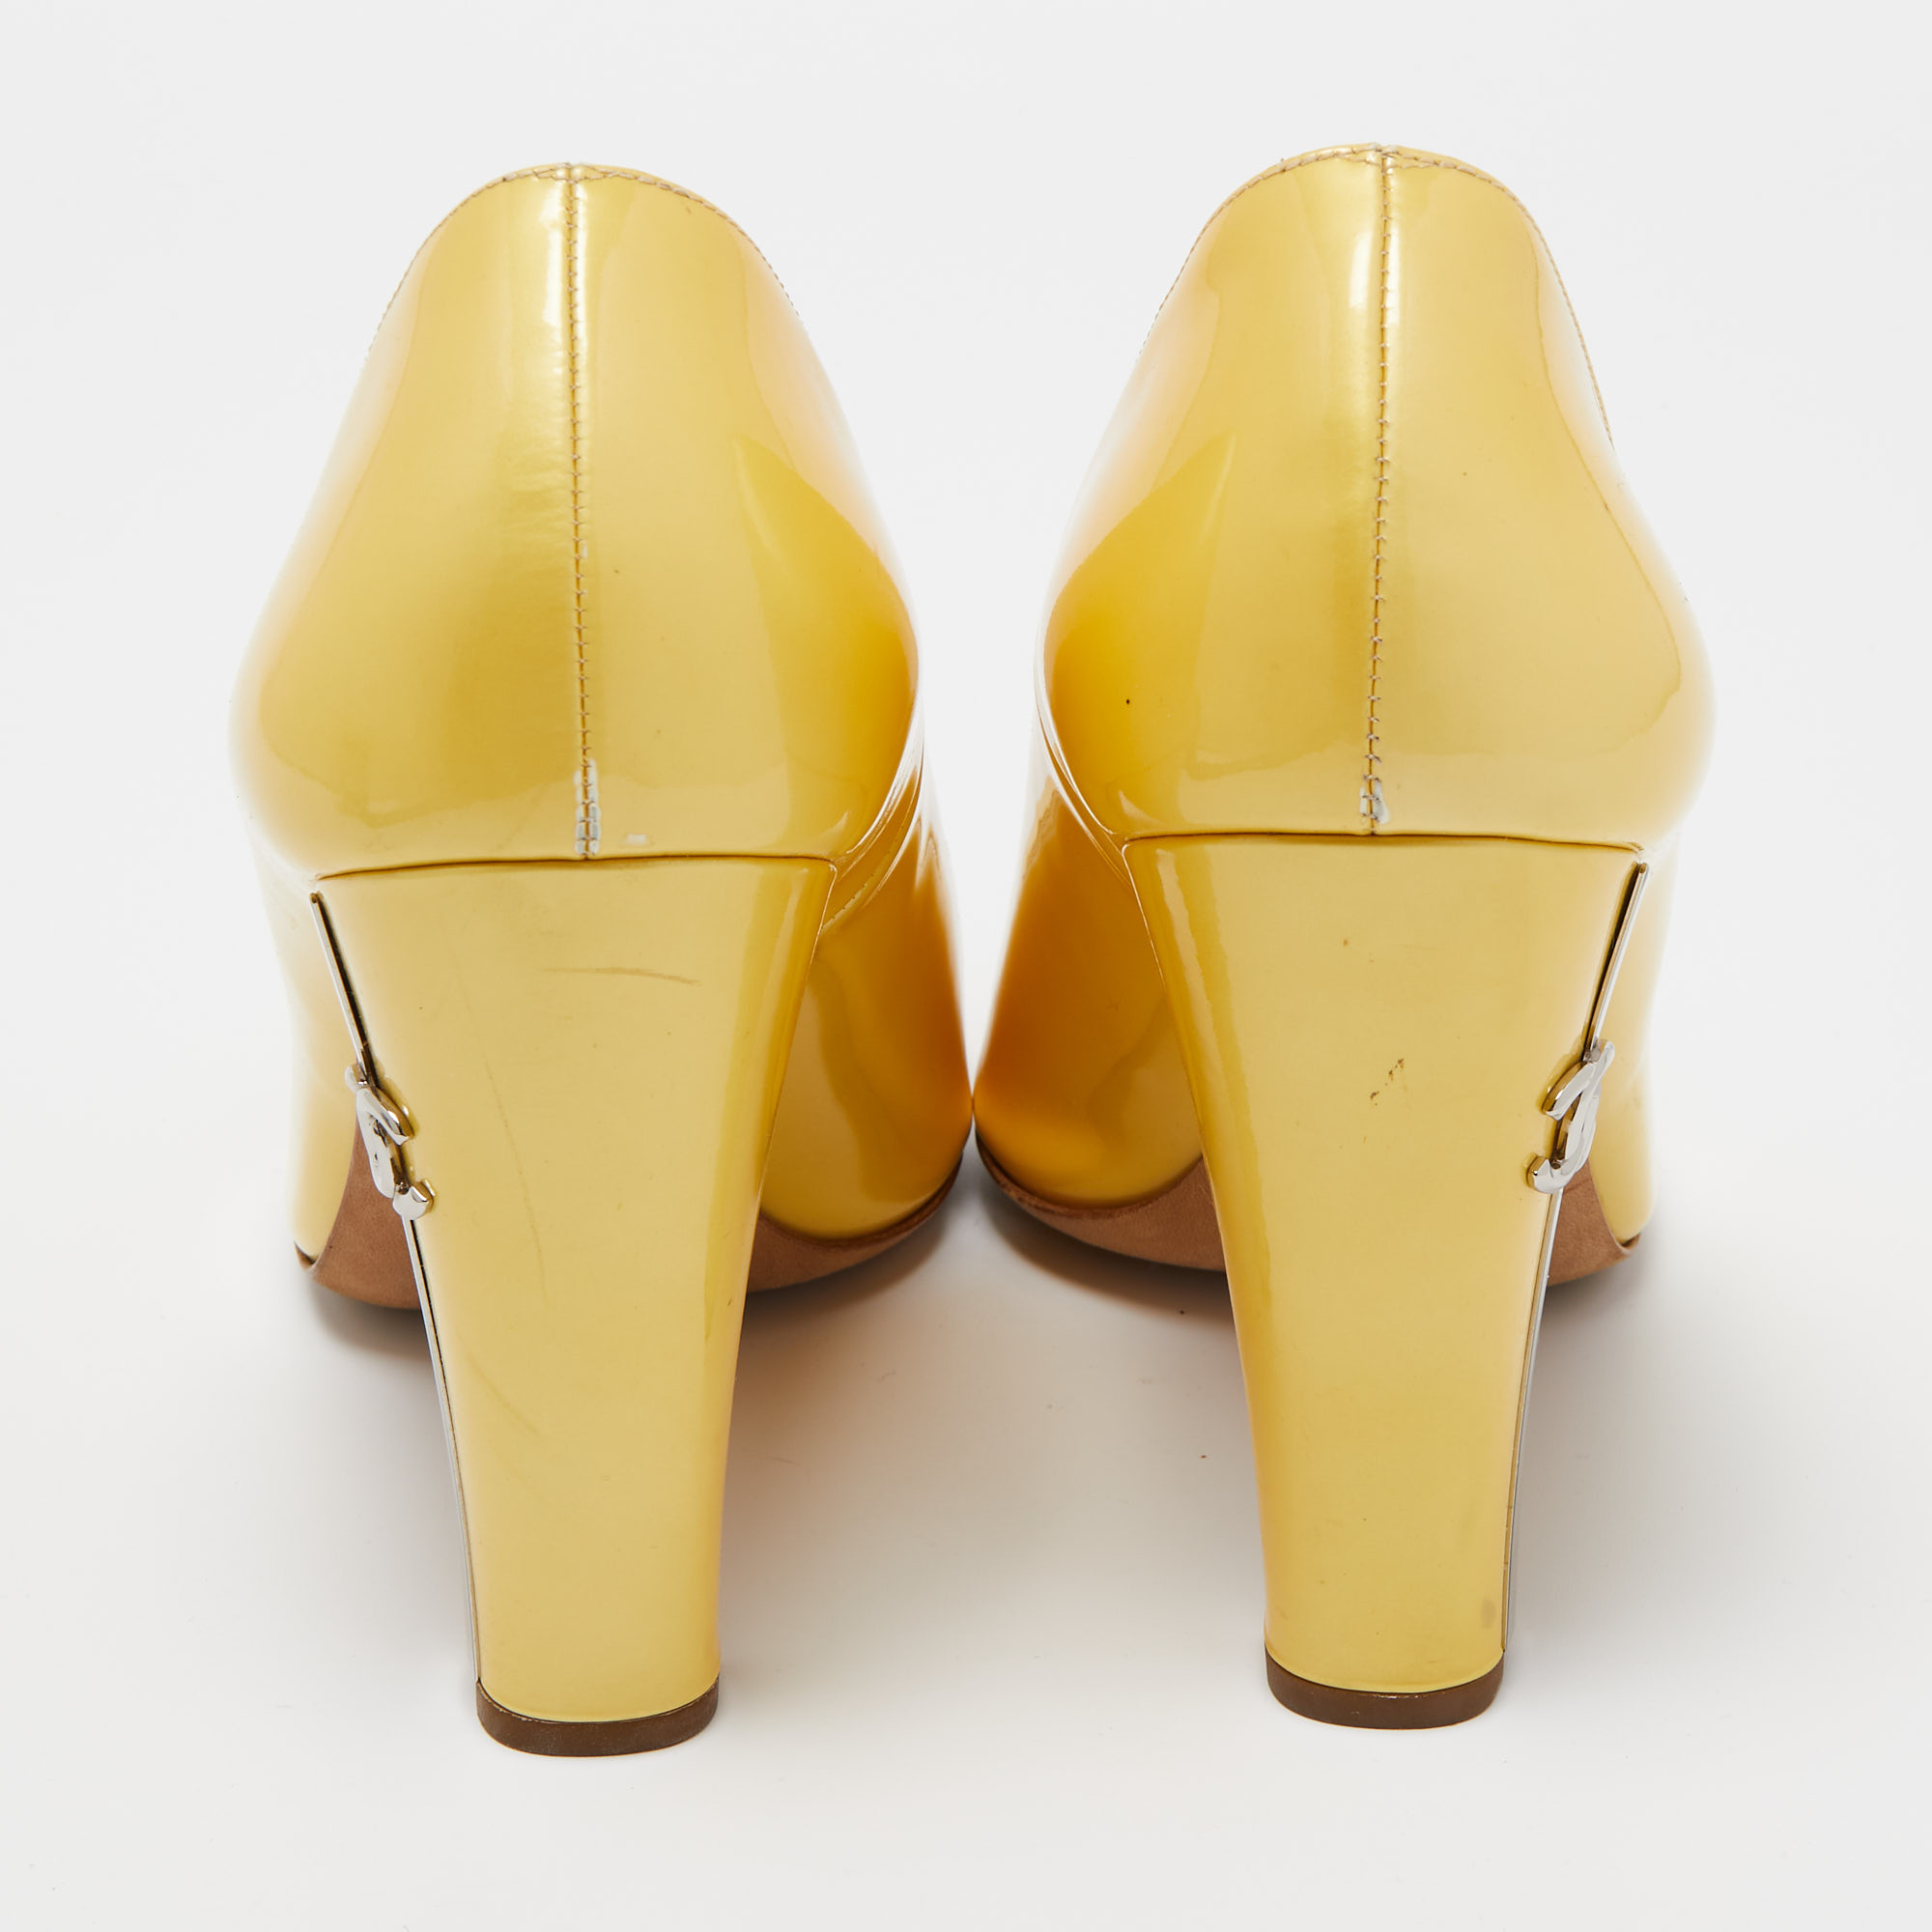 Chanel Yellow Patent Leather CC Open Toe Pumps Size 40